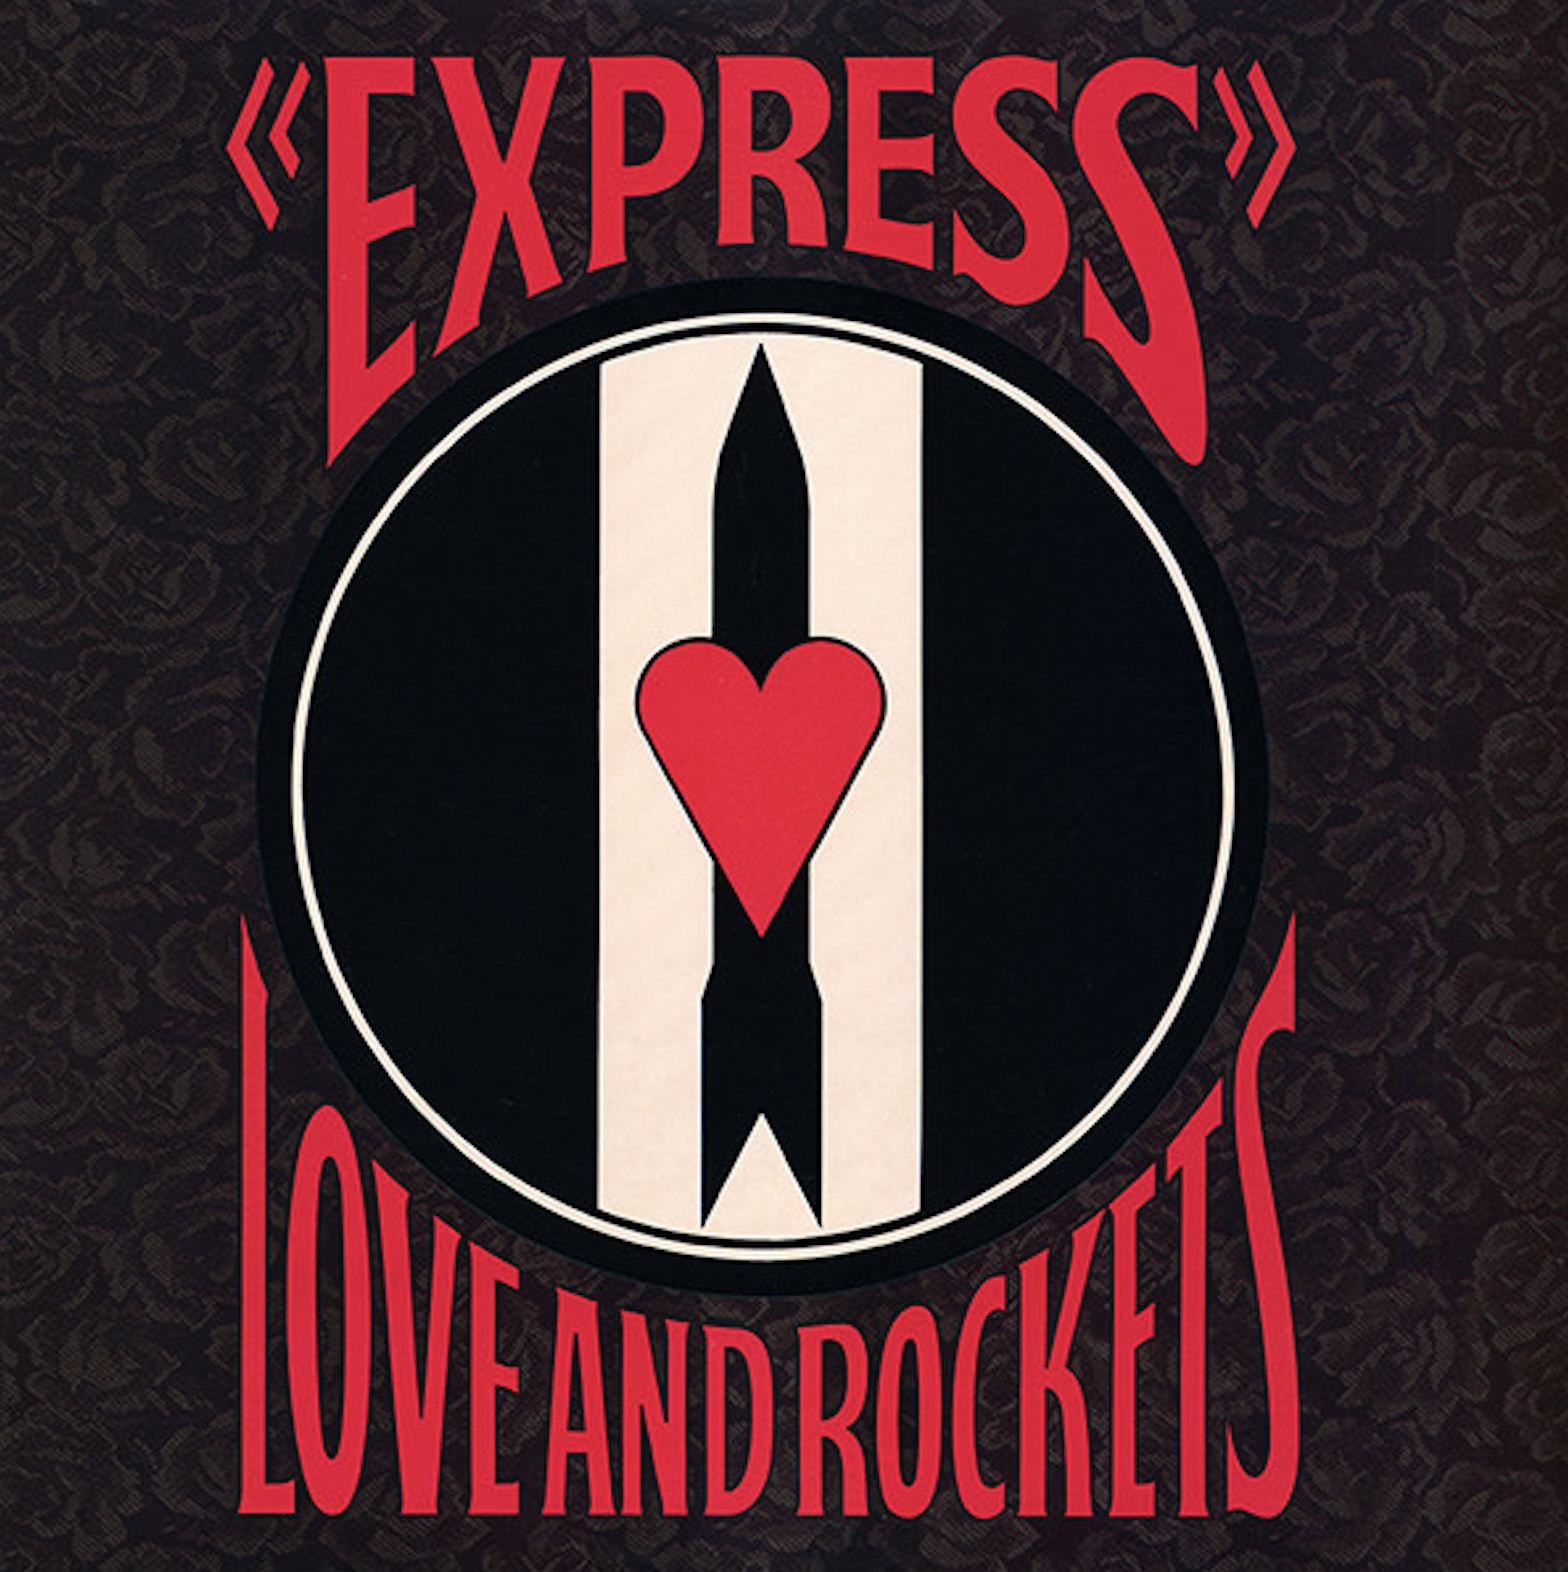 Express by Love and Rockets